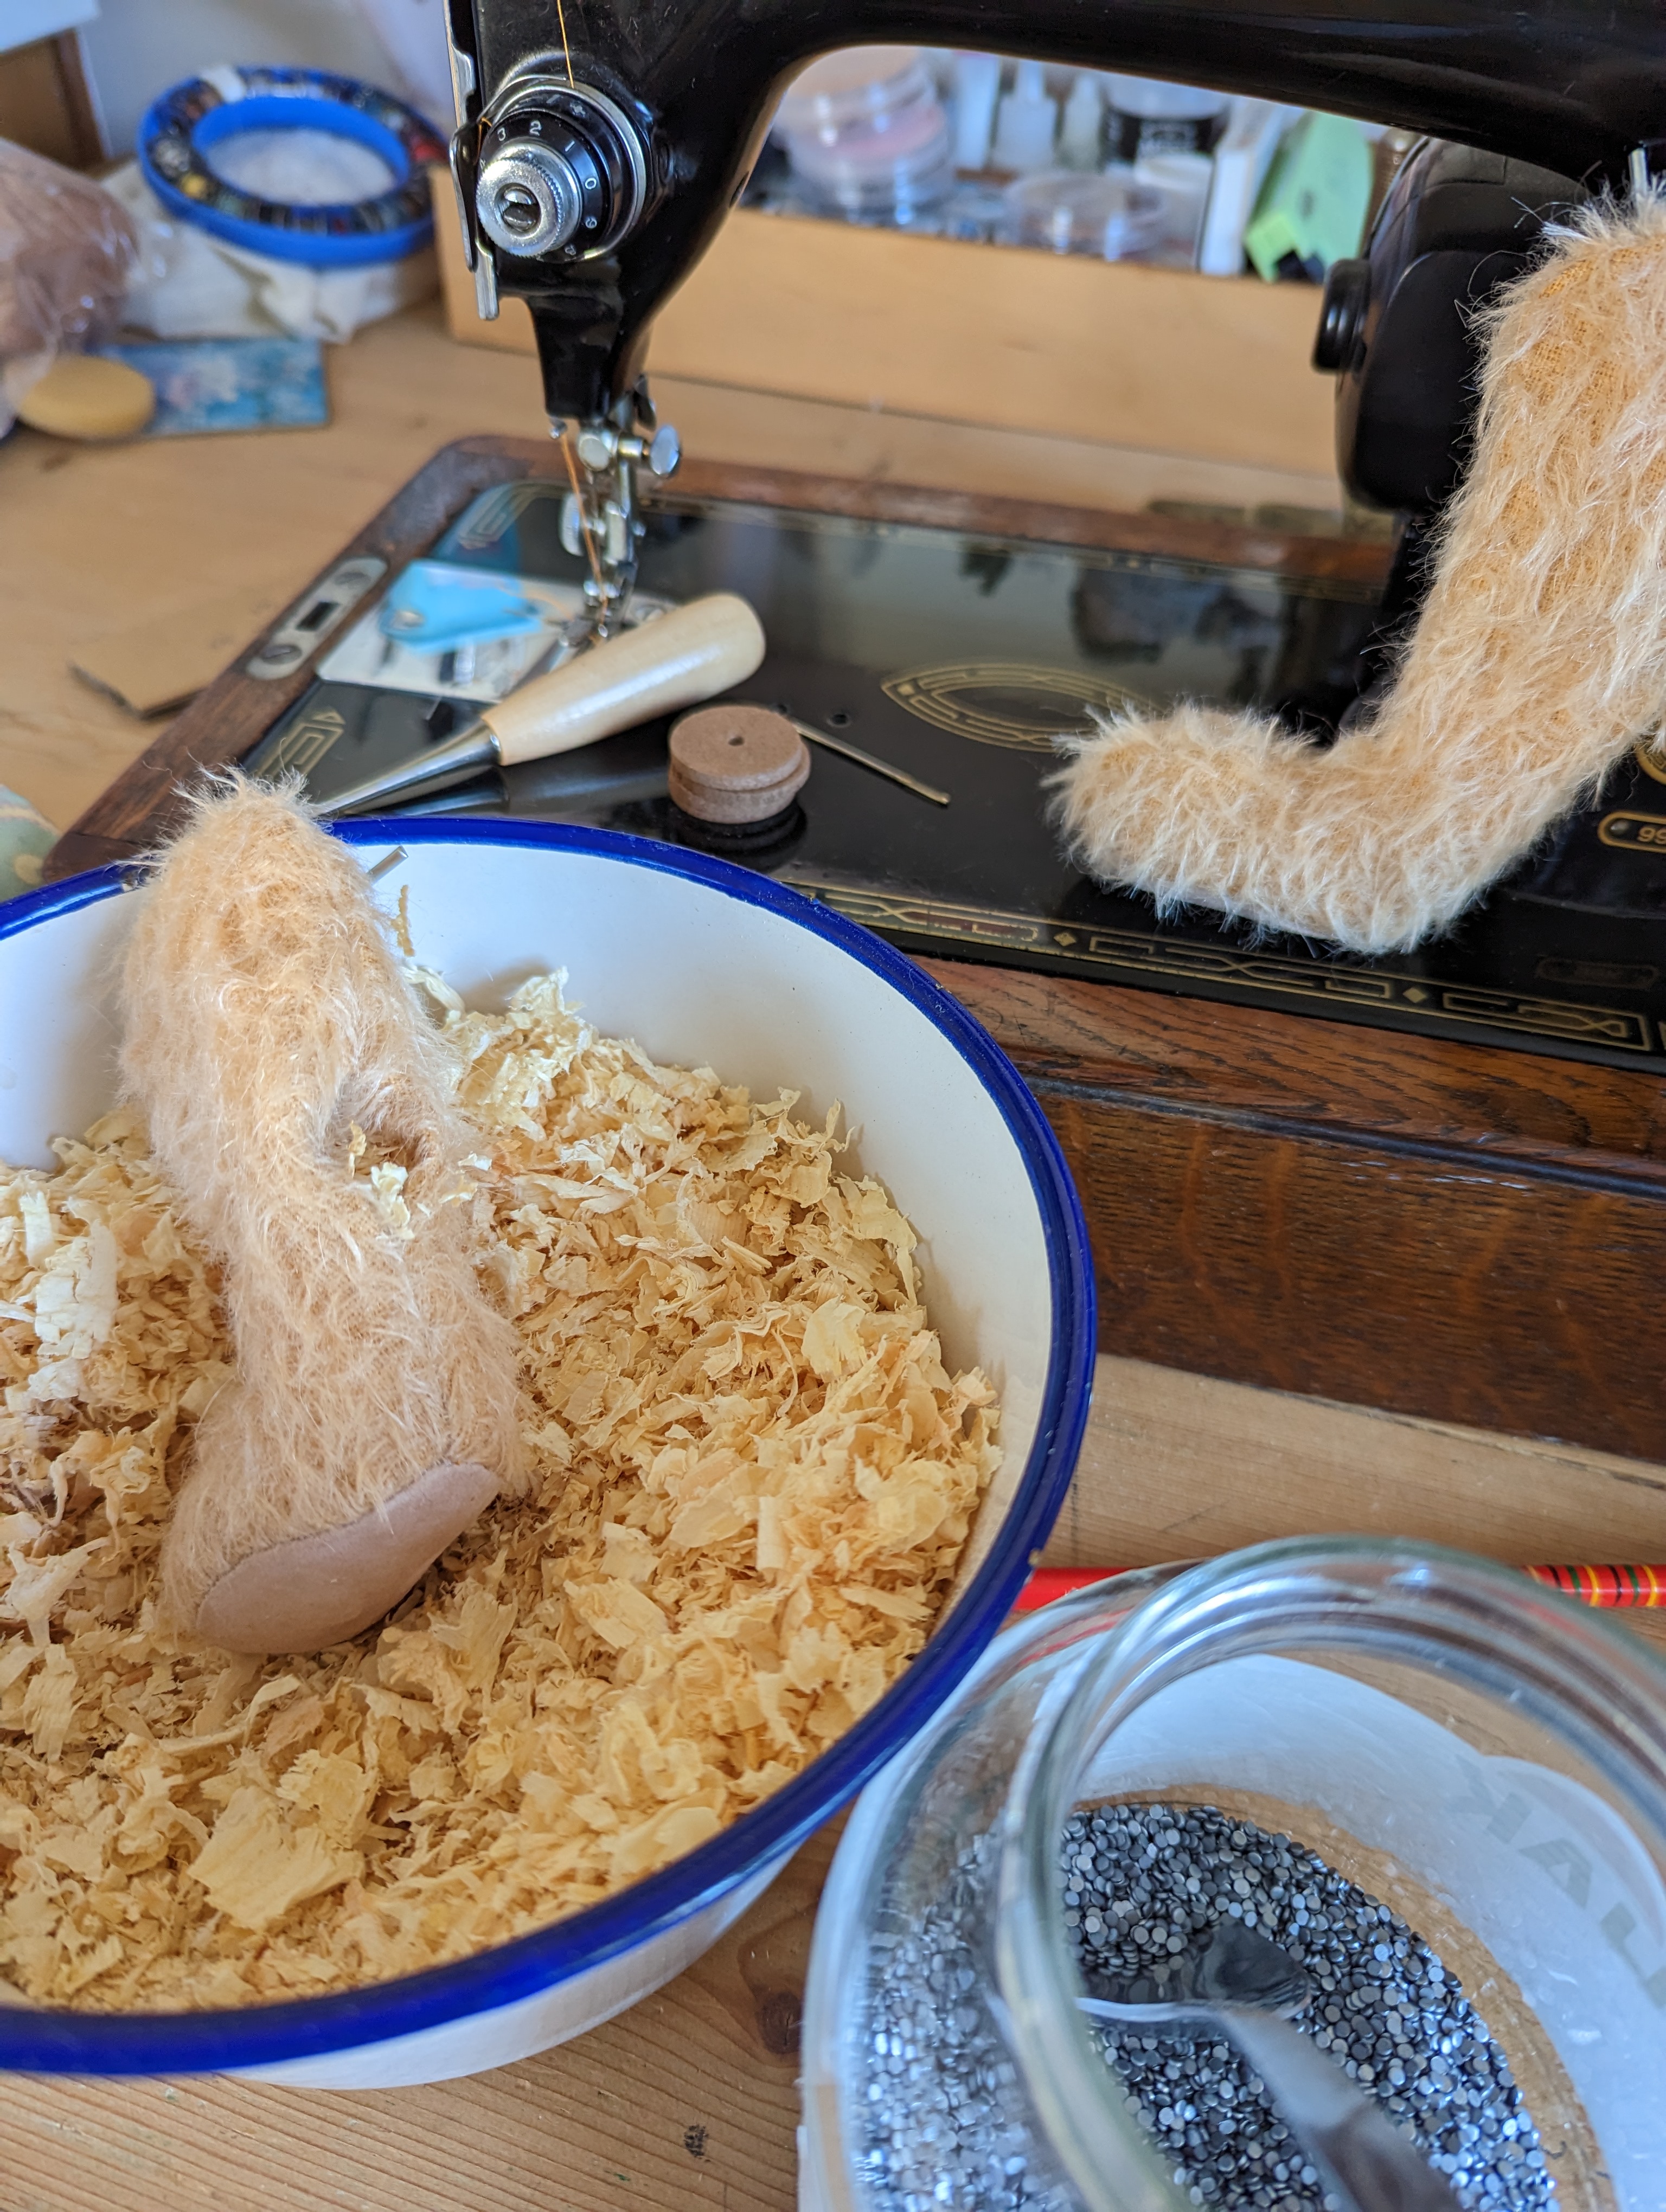 stuffing a traditional teddy with sawdust